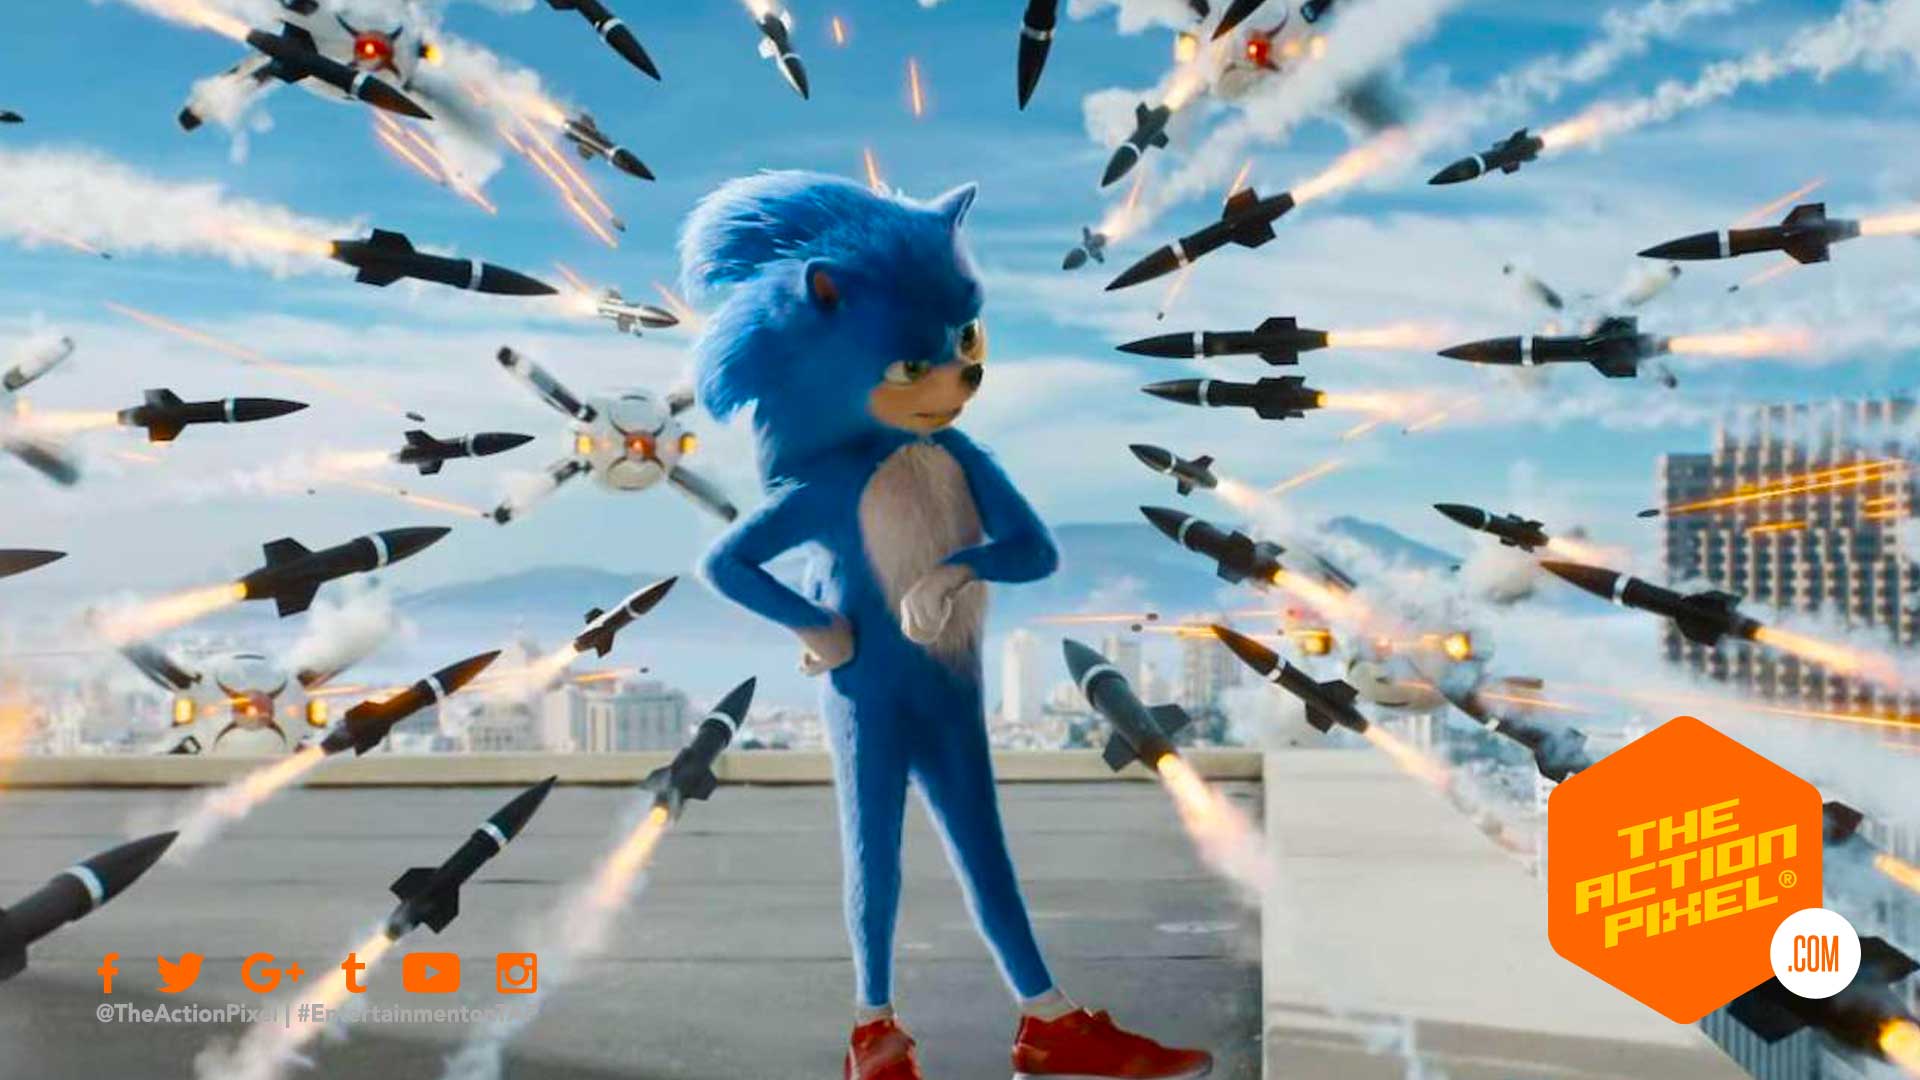 sonic the hedgehog, sonic, paramount pictures, the action pixel, entertainment on tap, poster, featured, paramount pictures, sonic movie, sonic movie trailer, sonic the hedgehog movie trailer, delays, sonic movie delayed, delay